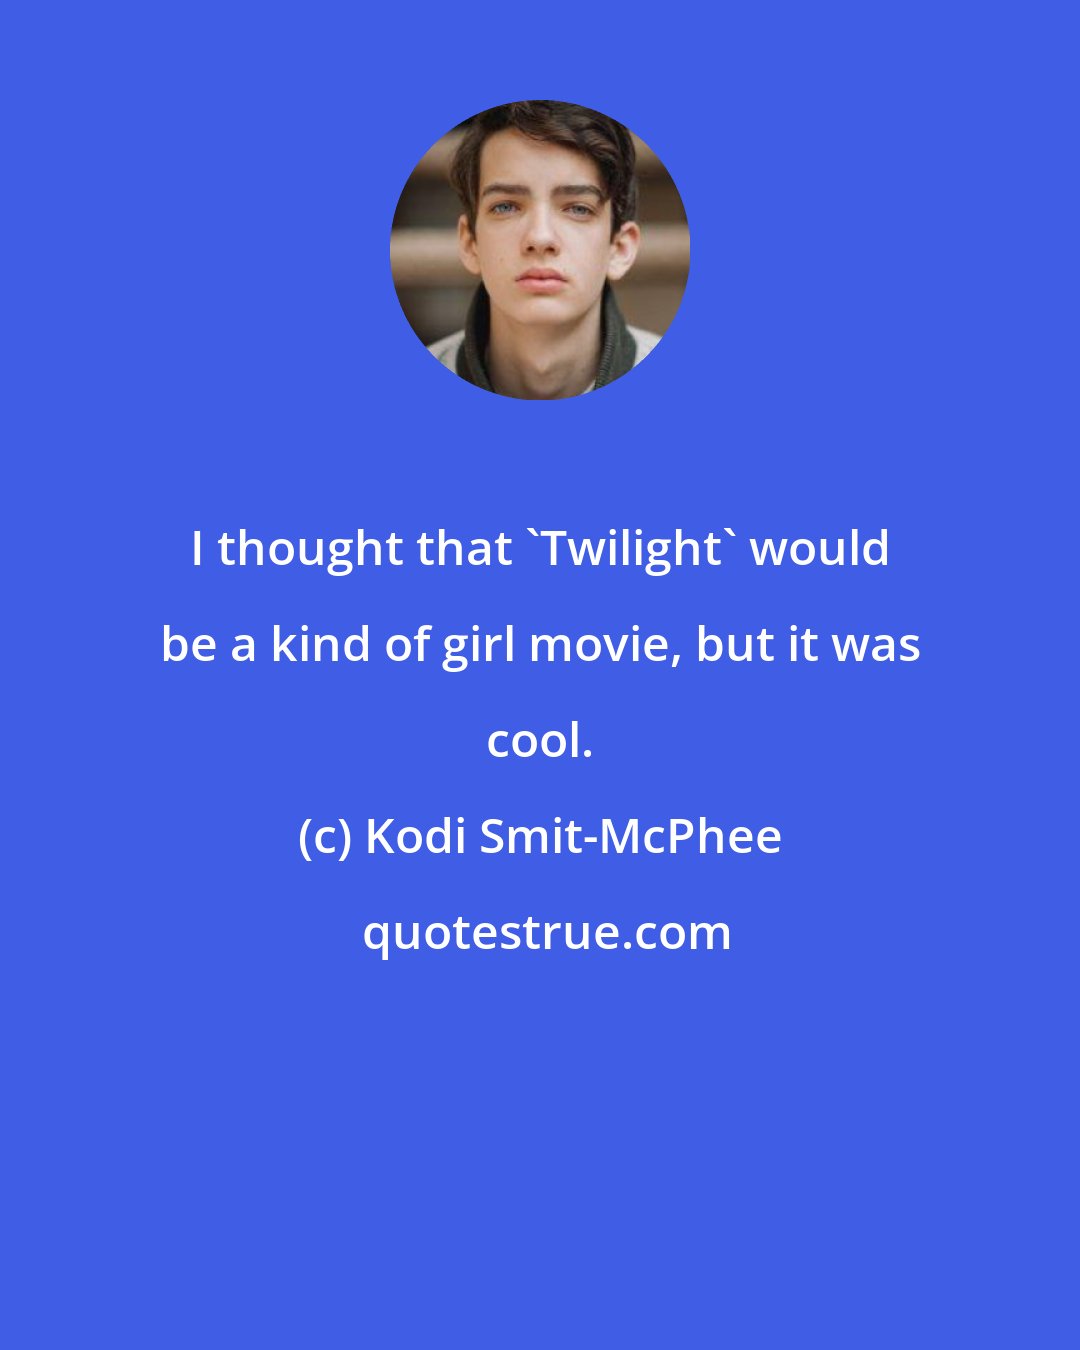 Kodi Smit-McPhee: I thought that 'Twilight' would be a kind of girl movie, but it was cool.